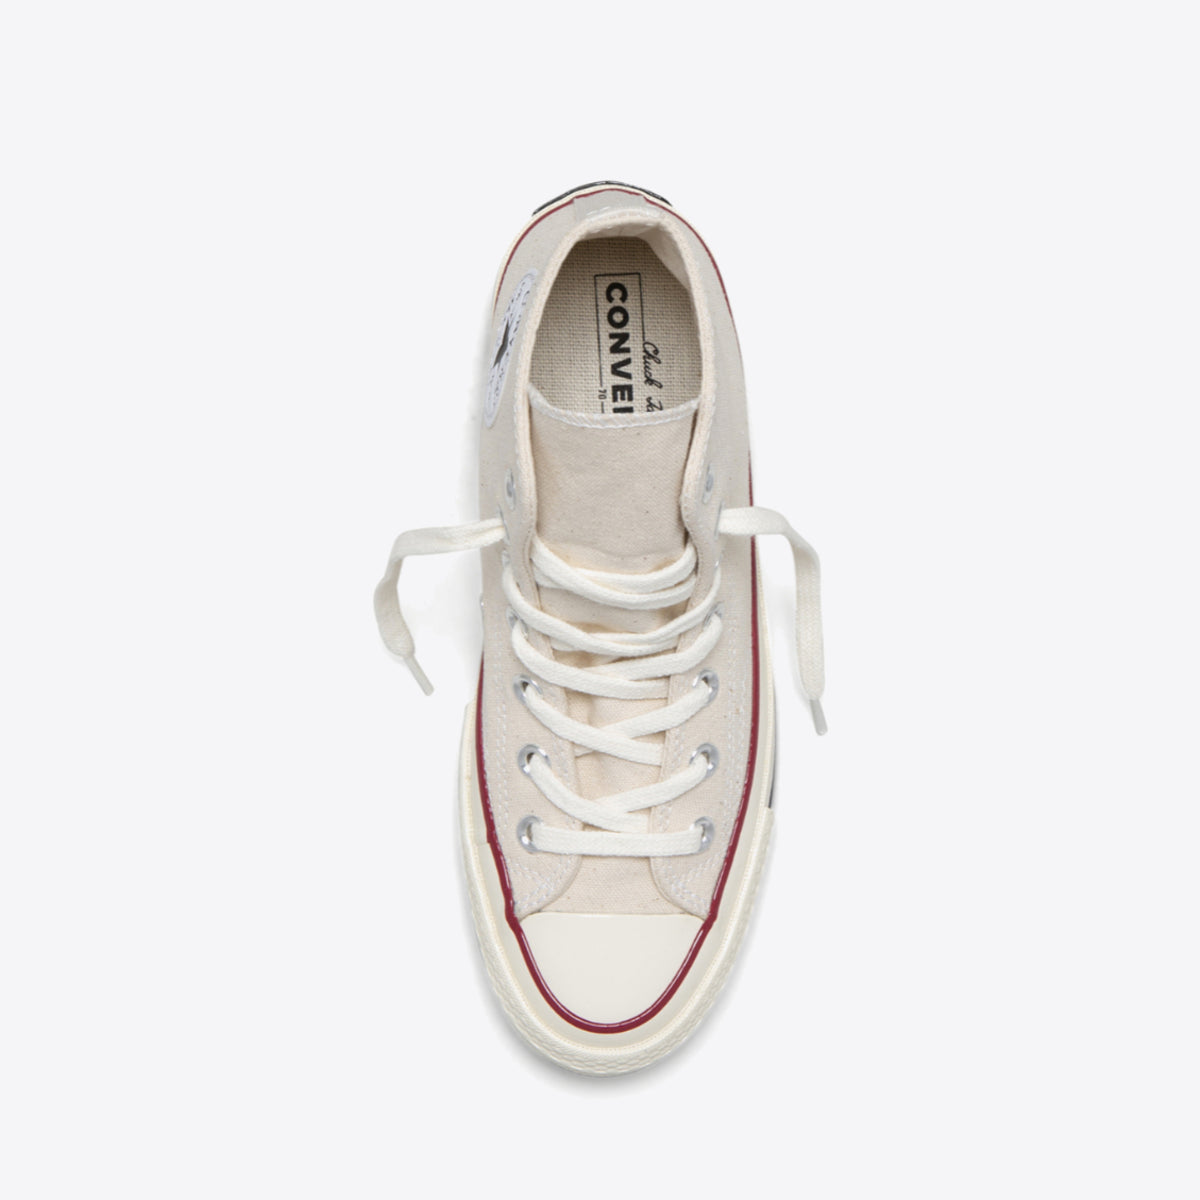  Chuck Taylor All Star 70 Canvas High Top Parchment